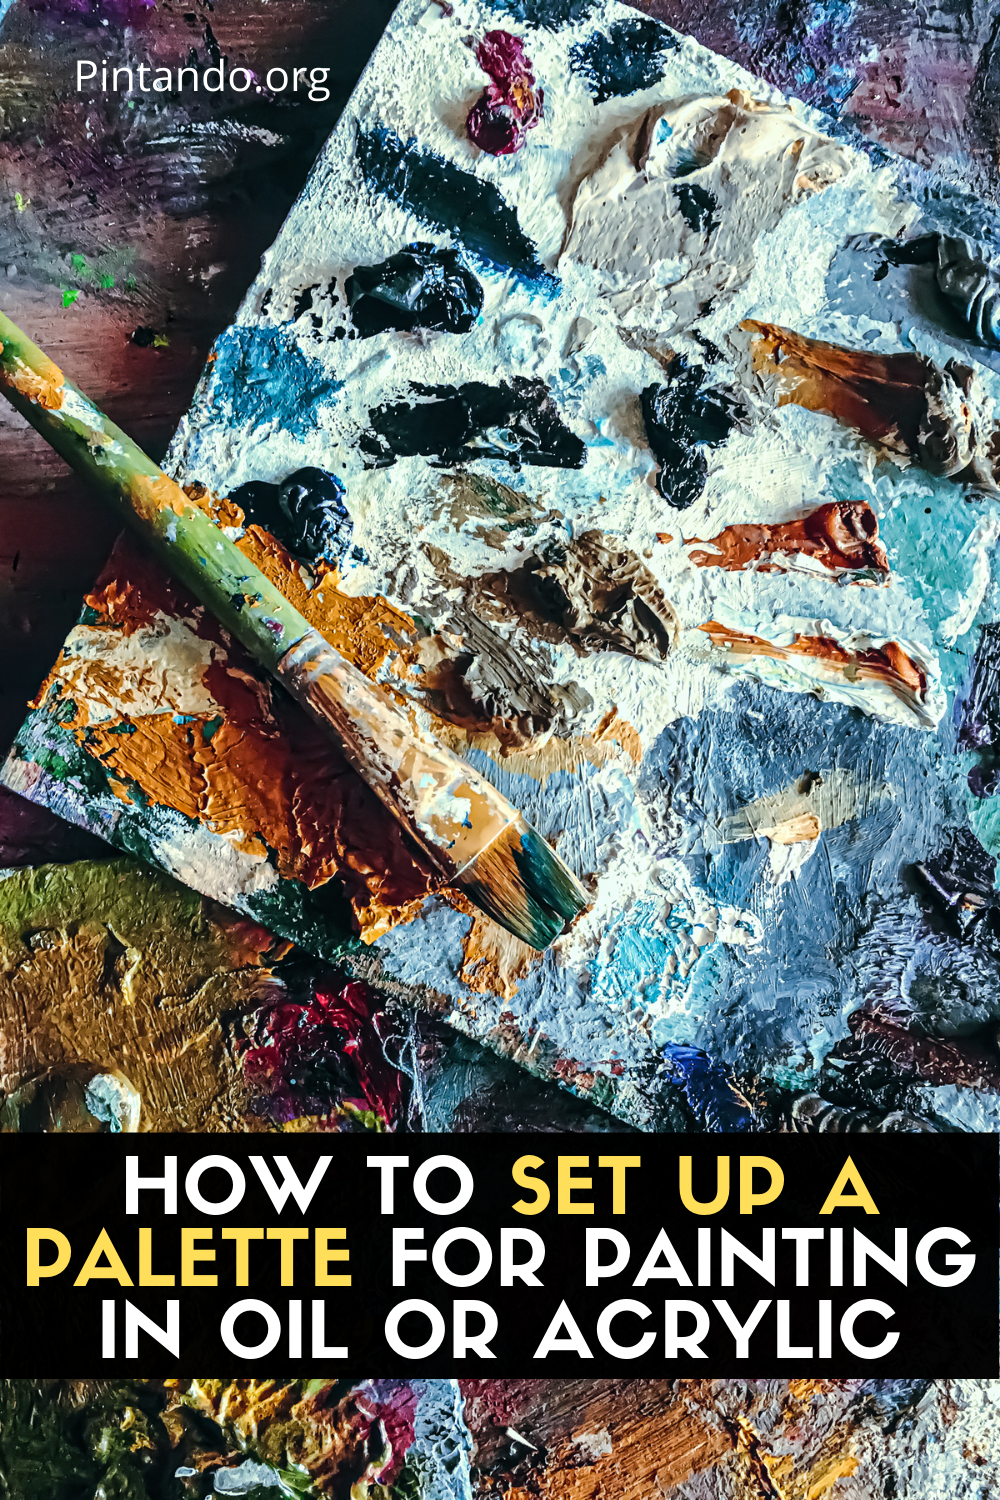 HOW TO SET UP A PALETTE FOR PAINTING IN OIL OR ACRYLIC